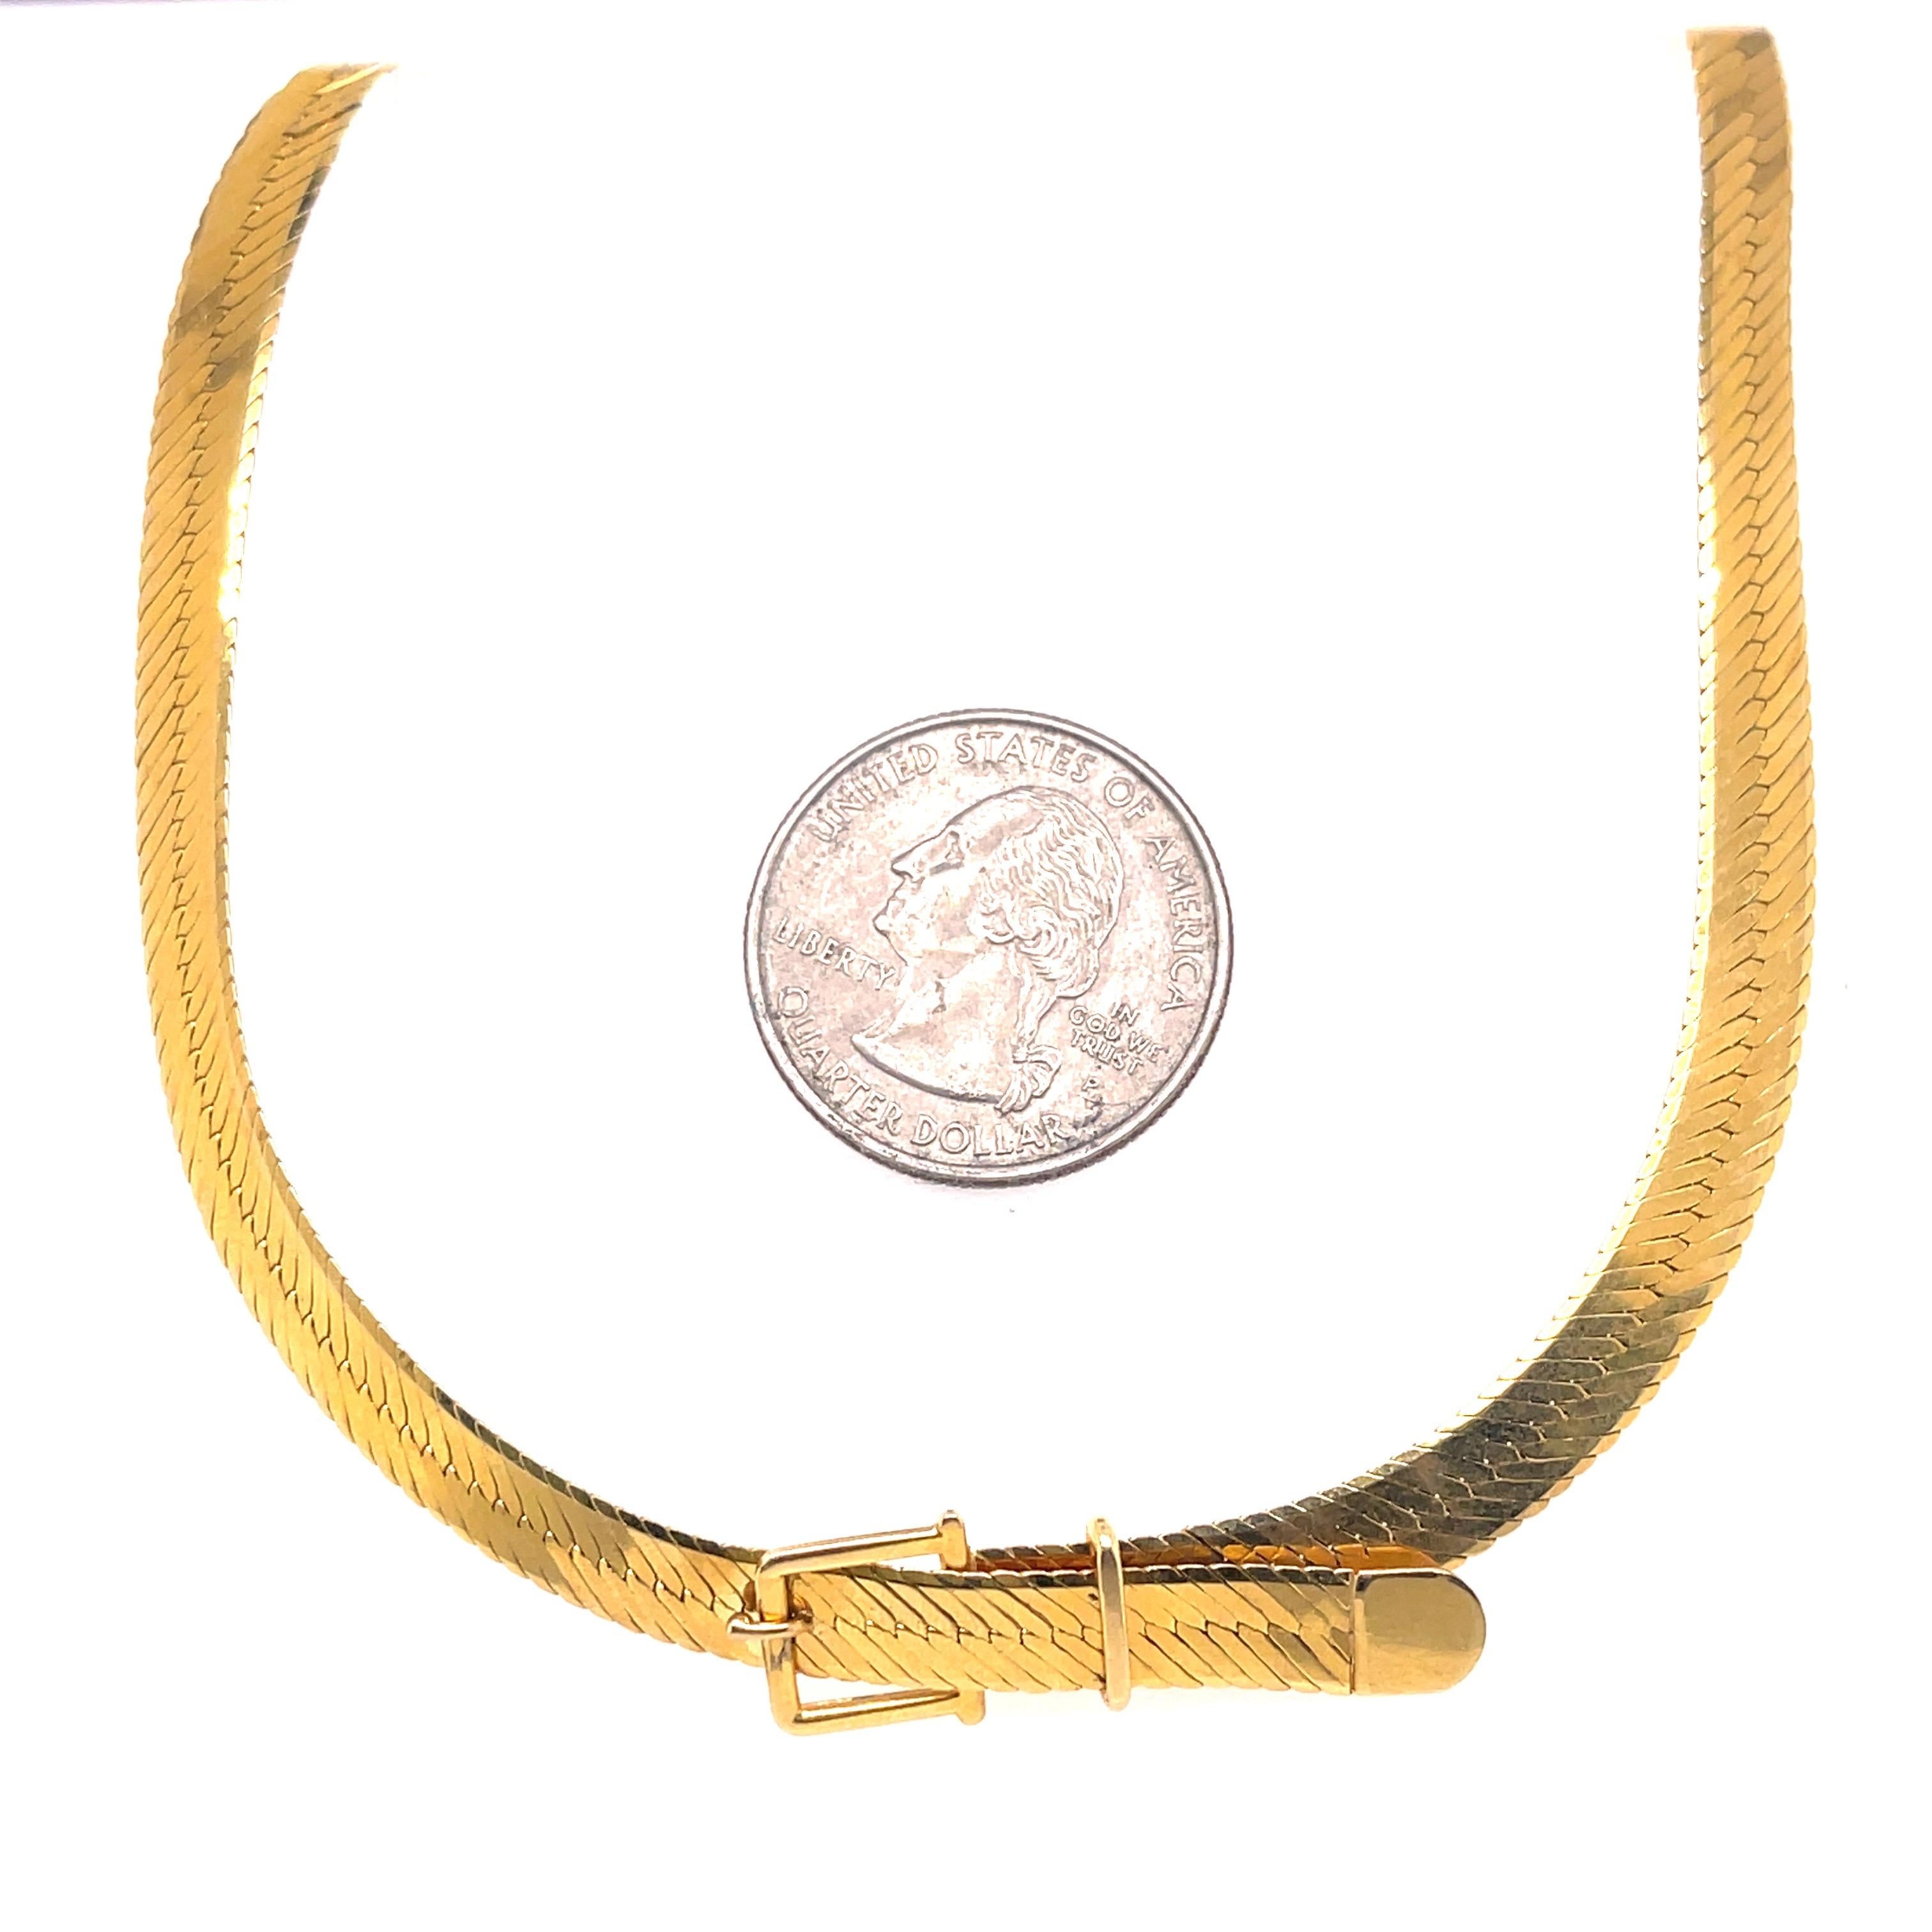 Vintage 14 karat yellow gold necklace featuring a herringbone chain with a center buckle motif. Made in Italy
Lobster Clasp